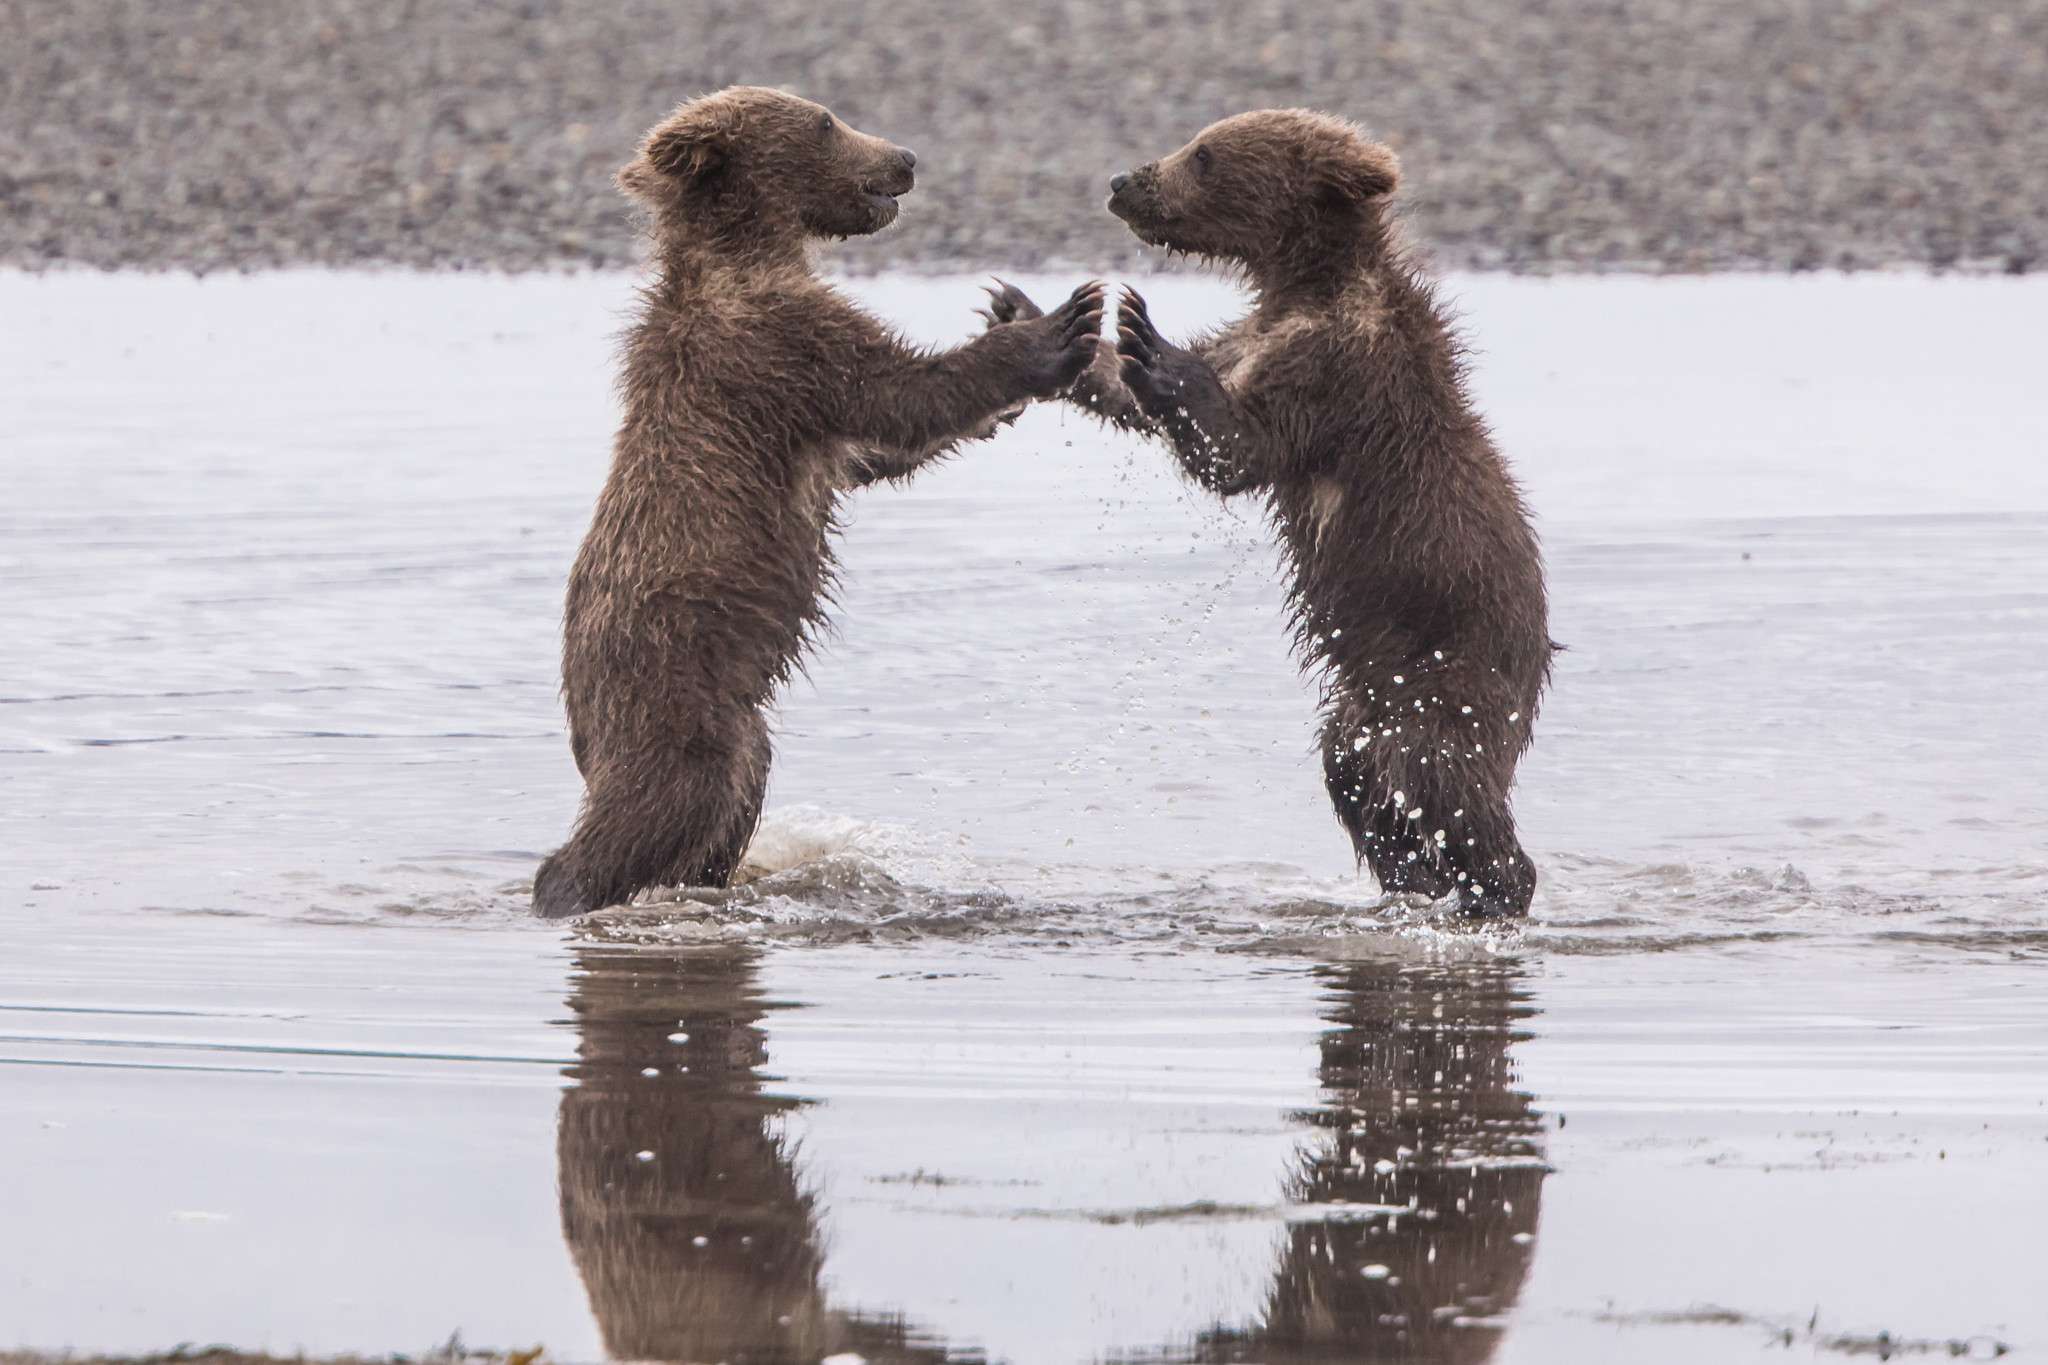 Two cubs play in the water in Alaska.